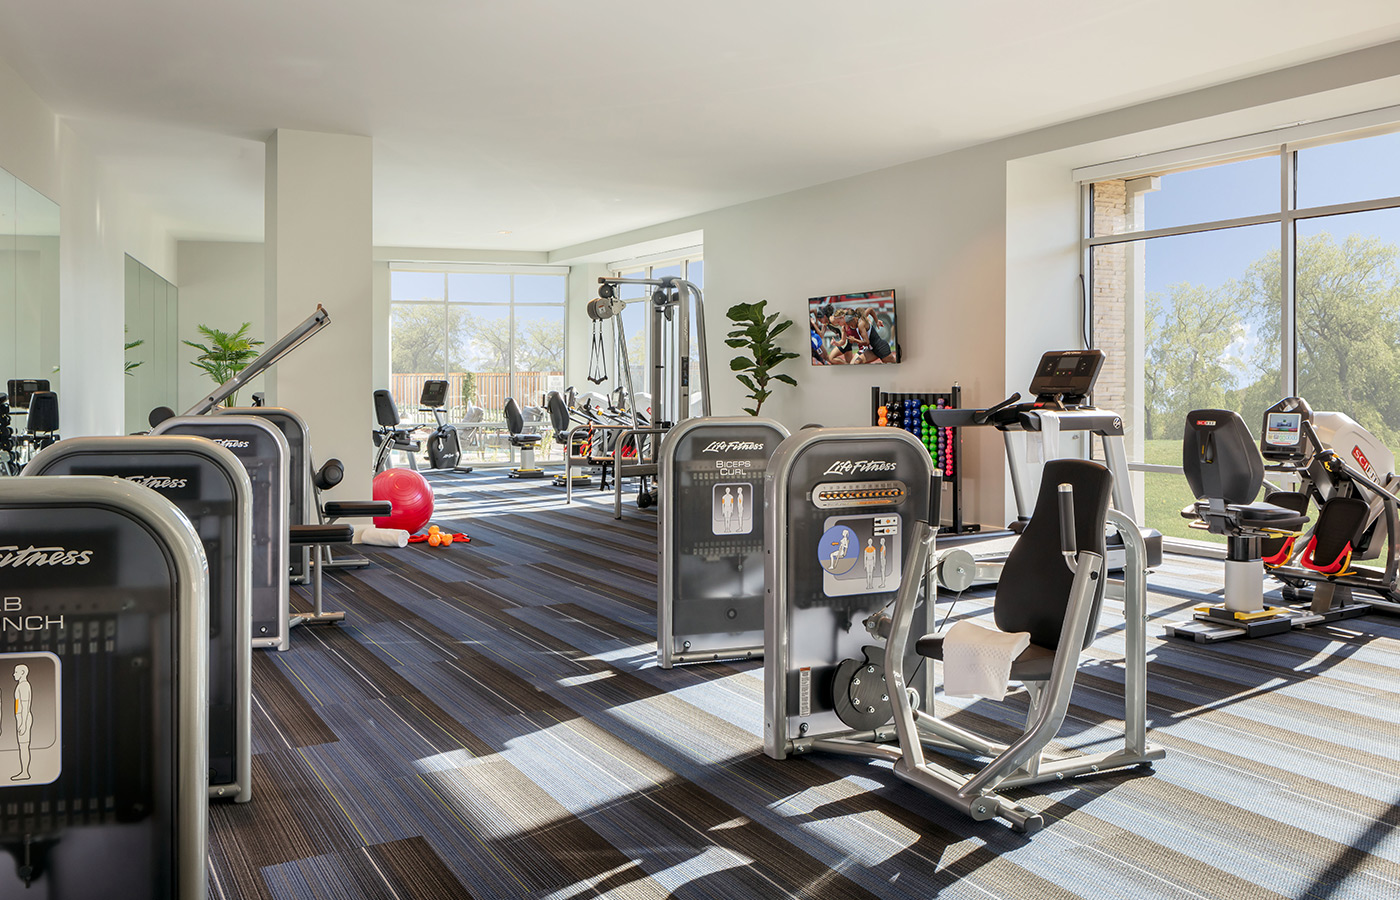 The fitness center.